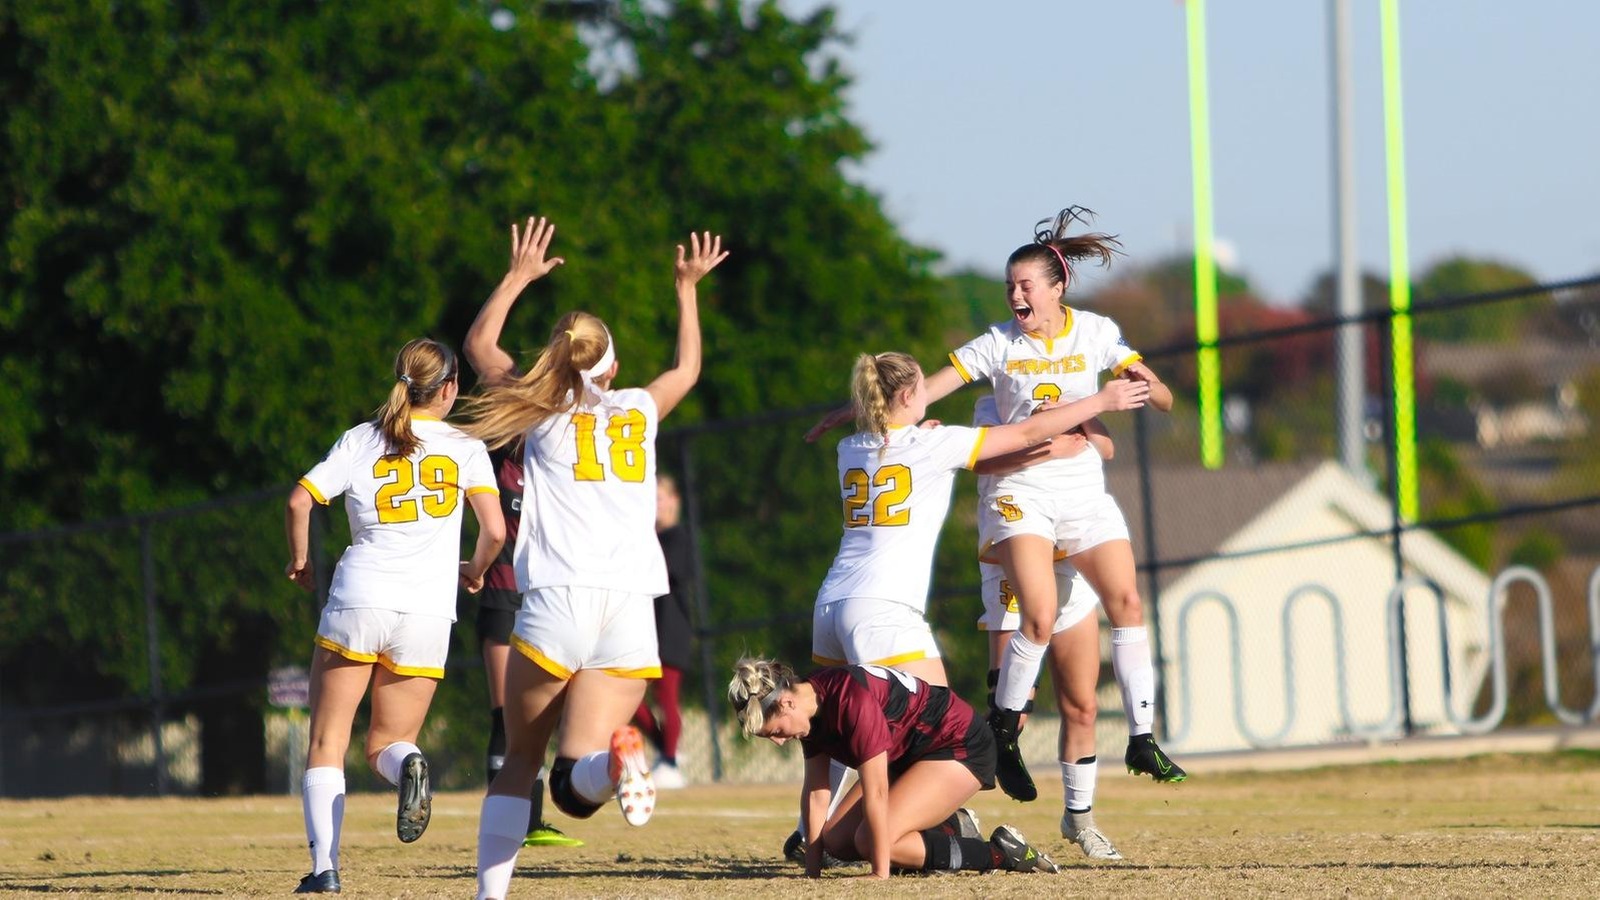 Women's Soccer Advances to SCAC Championship Match After Buzzer Beater Goal in Overtime